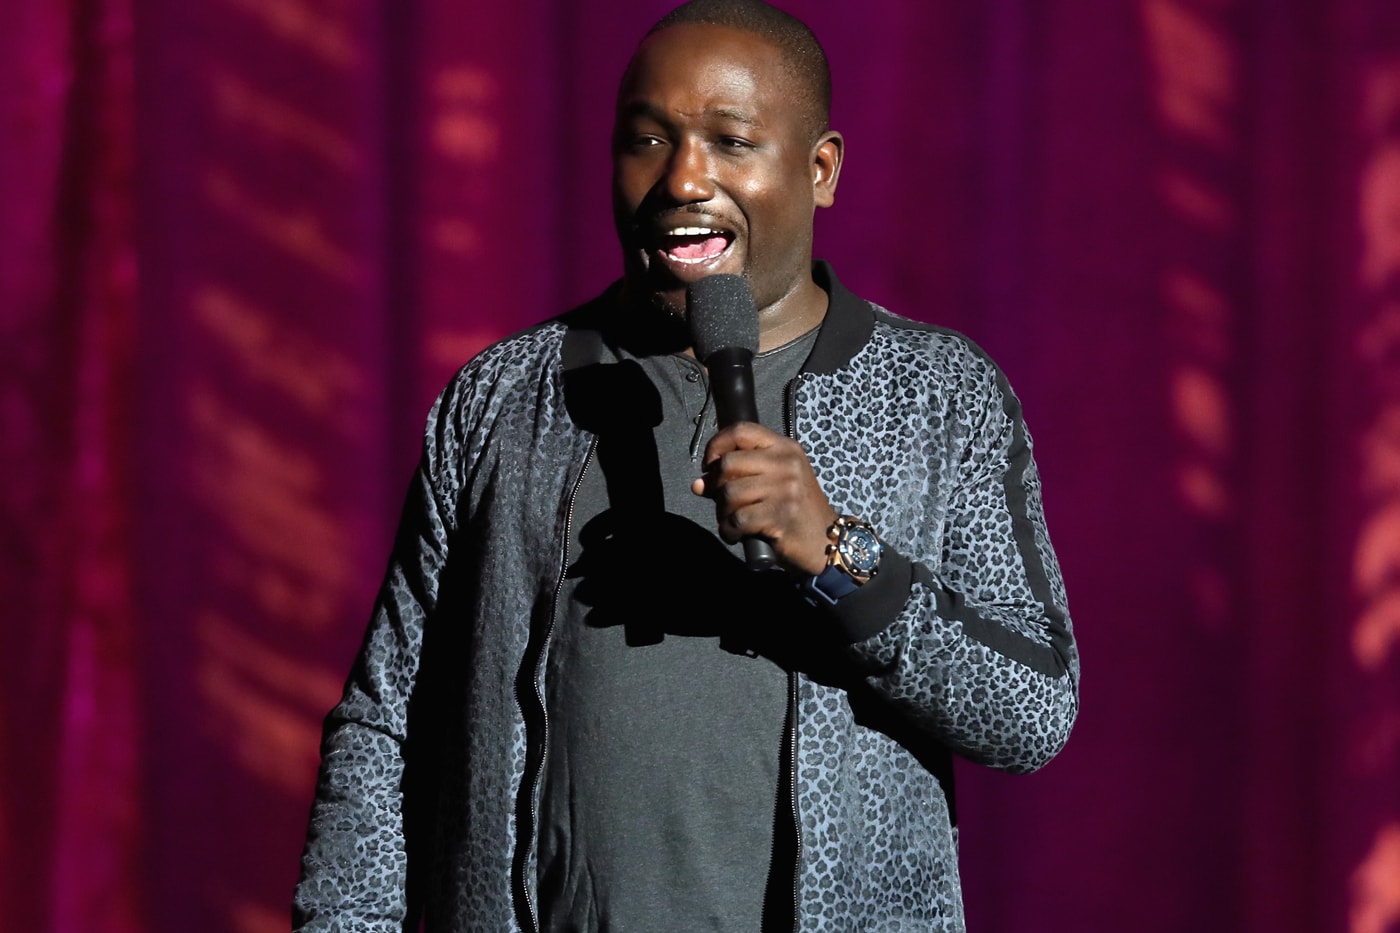 Hannibal Buress Made an Unreleased Kanye West Diss Song